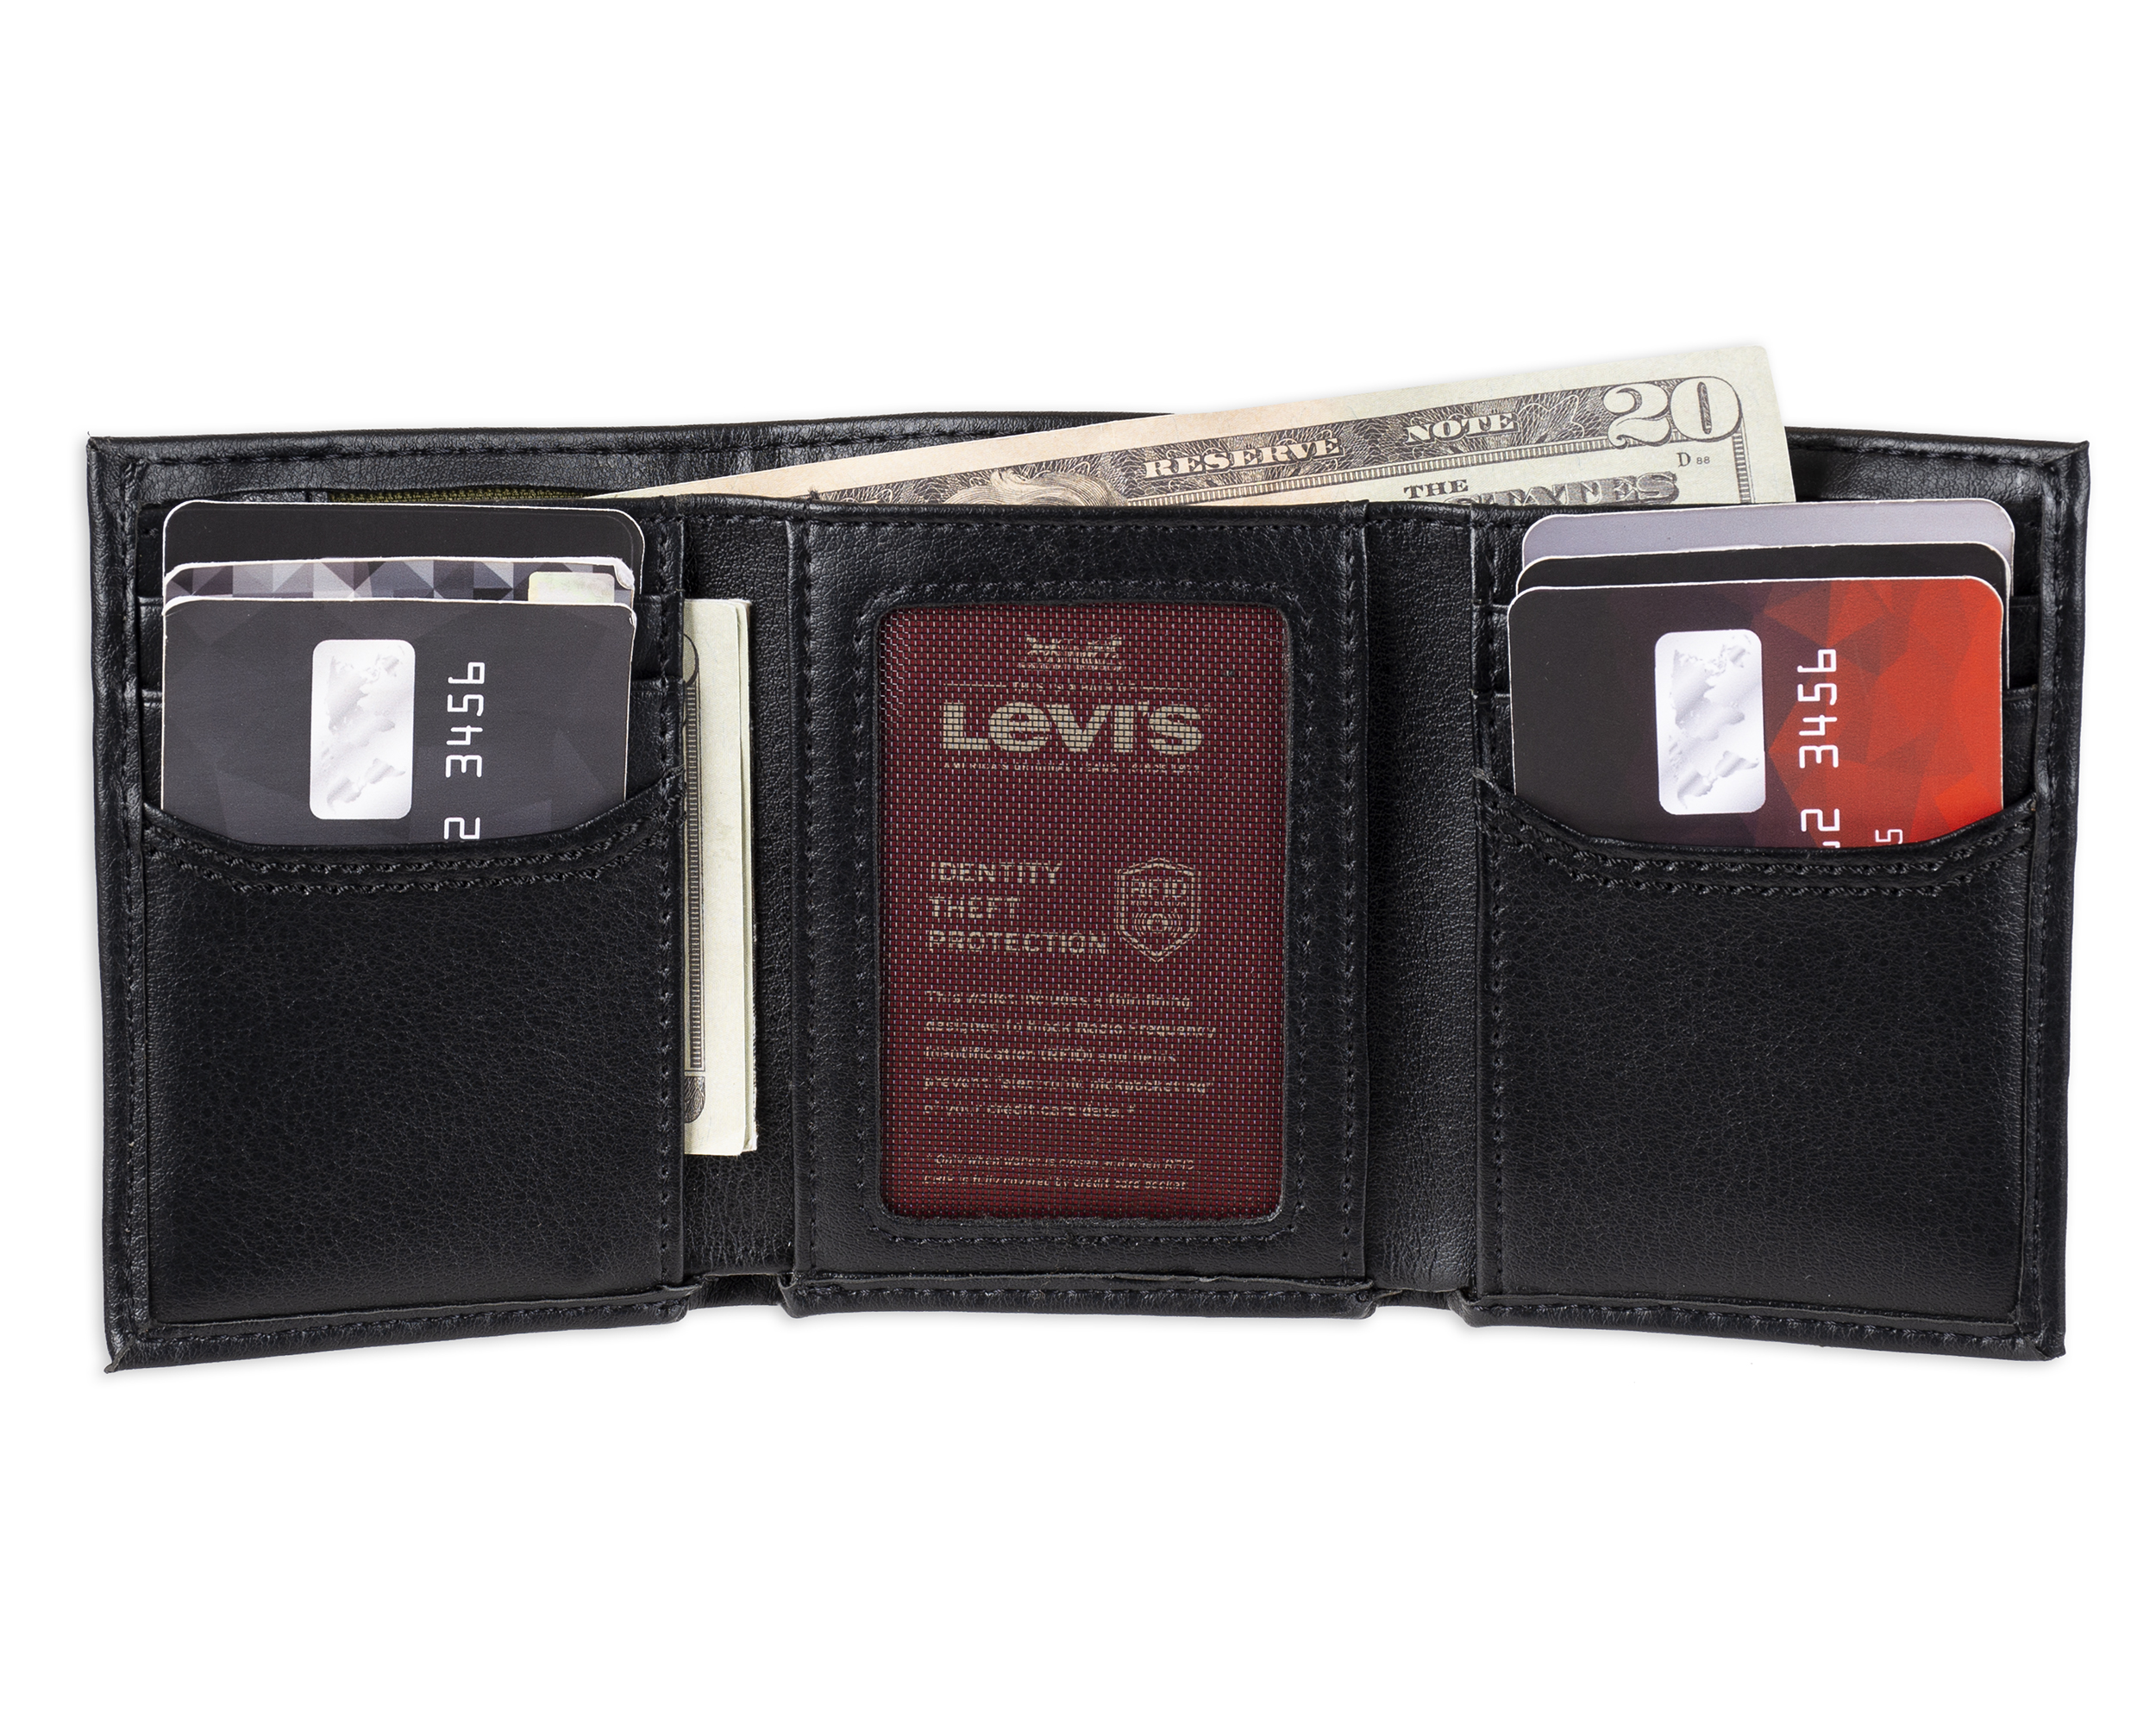 Levi's Men's Black RFID Trifold Wallet with Interior Zipper - image 3 of 5